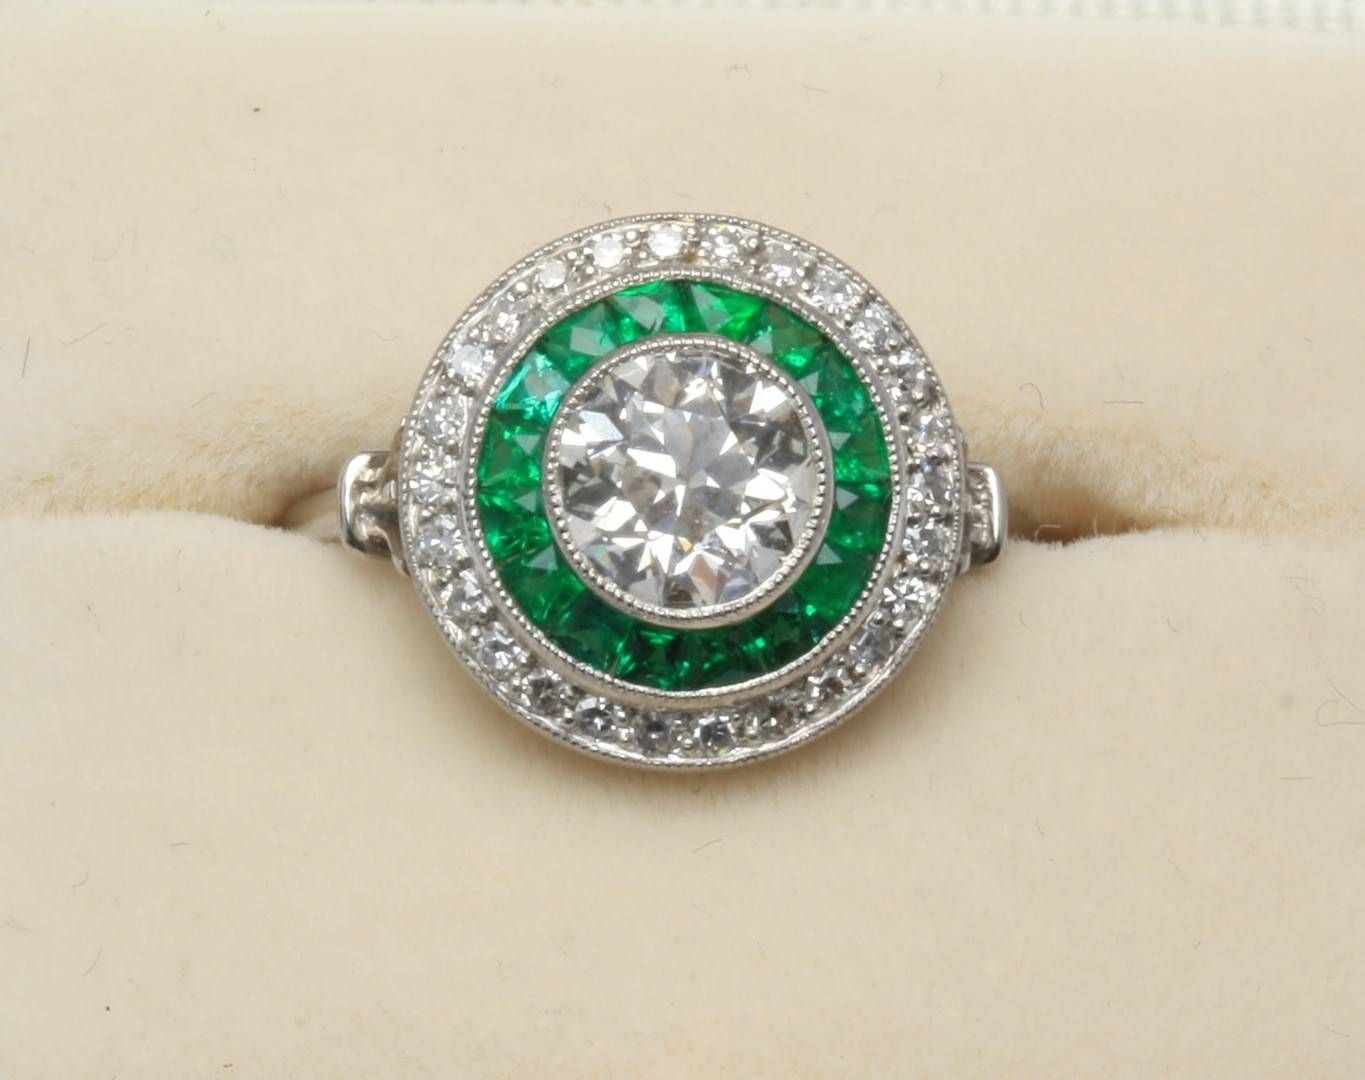 Vintage Celtic Engagement Rings | Lake Side Corrals In Antique Irish Engagement Rings (View 10 of 15)